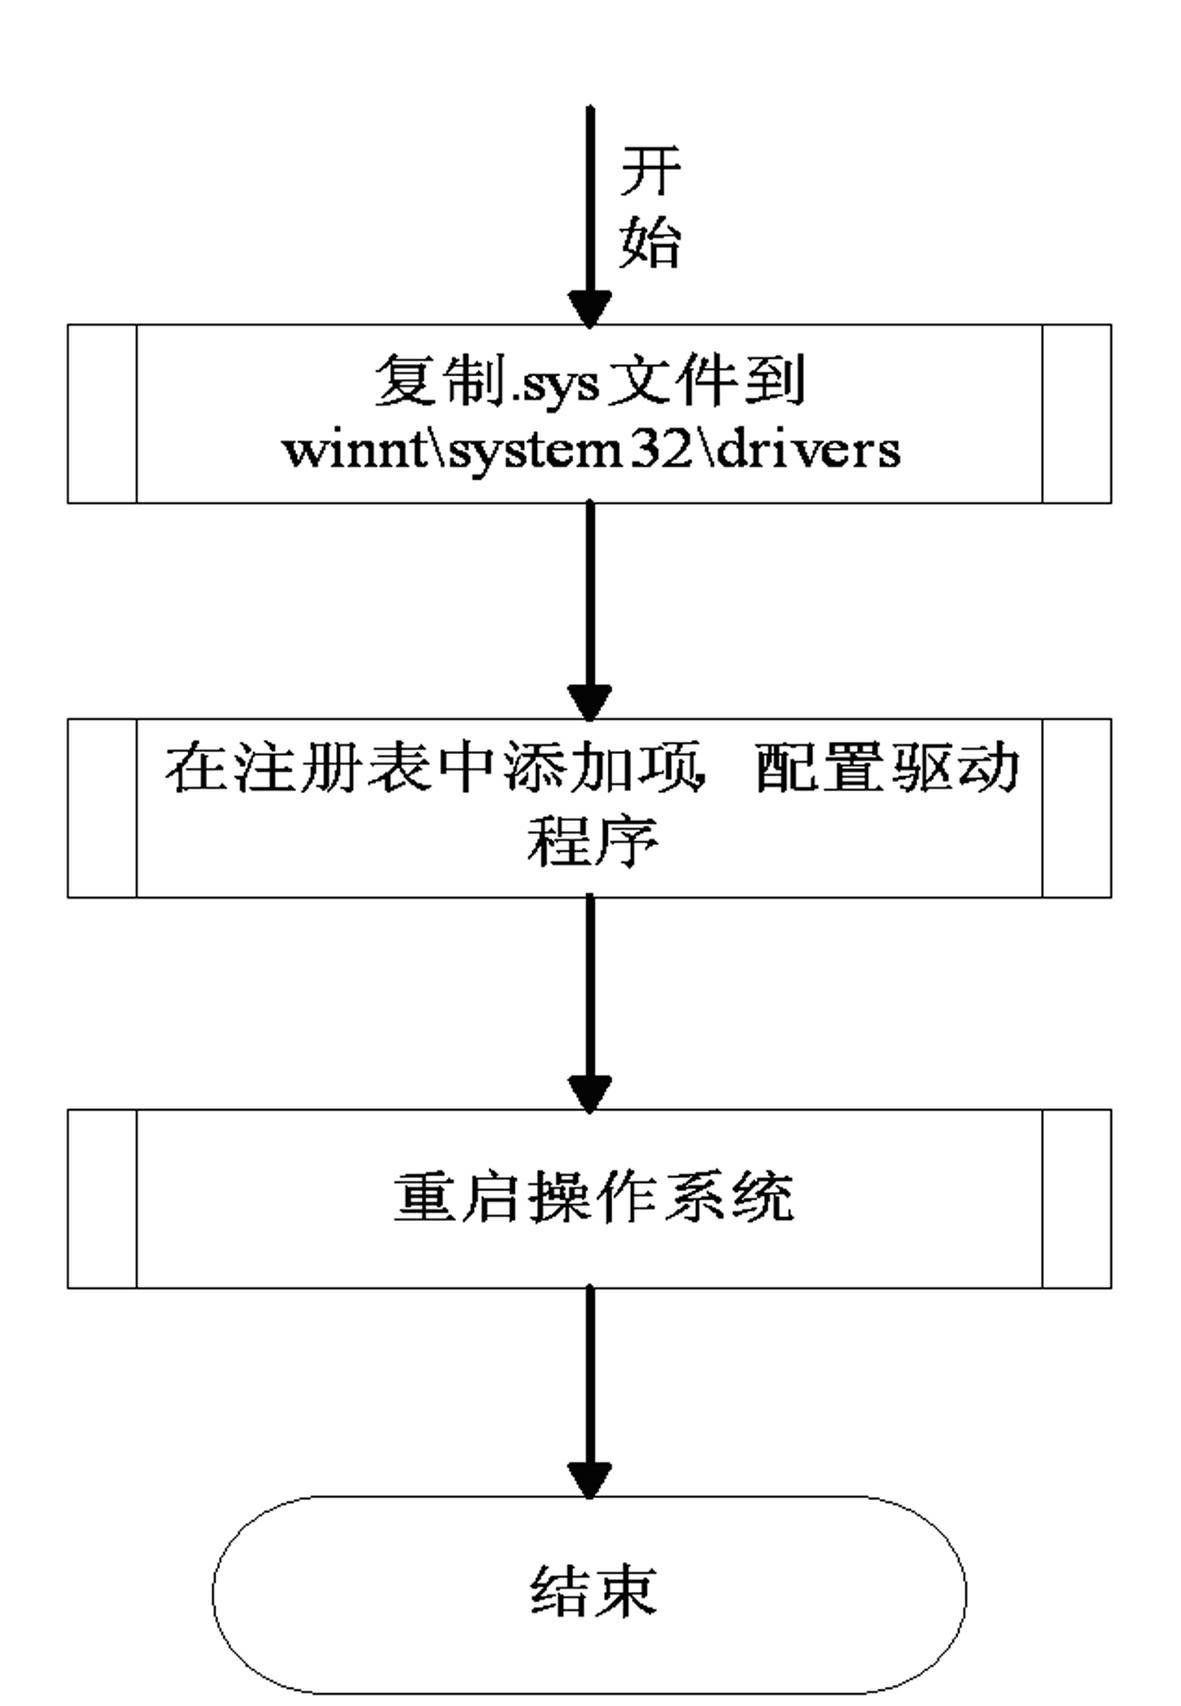 File security active protection method based on double-drive linkage